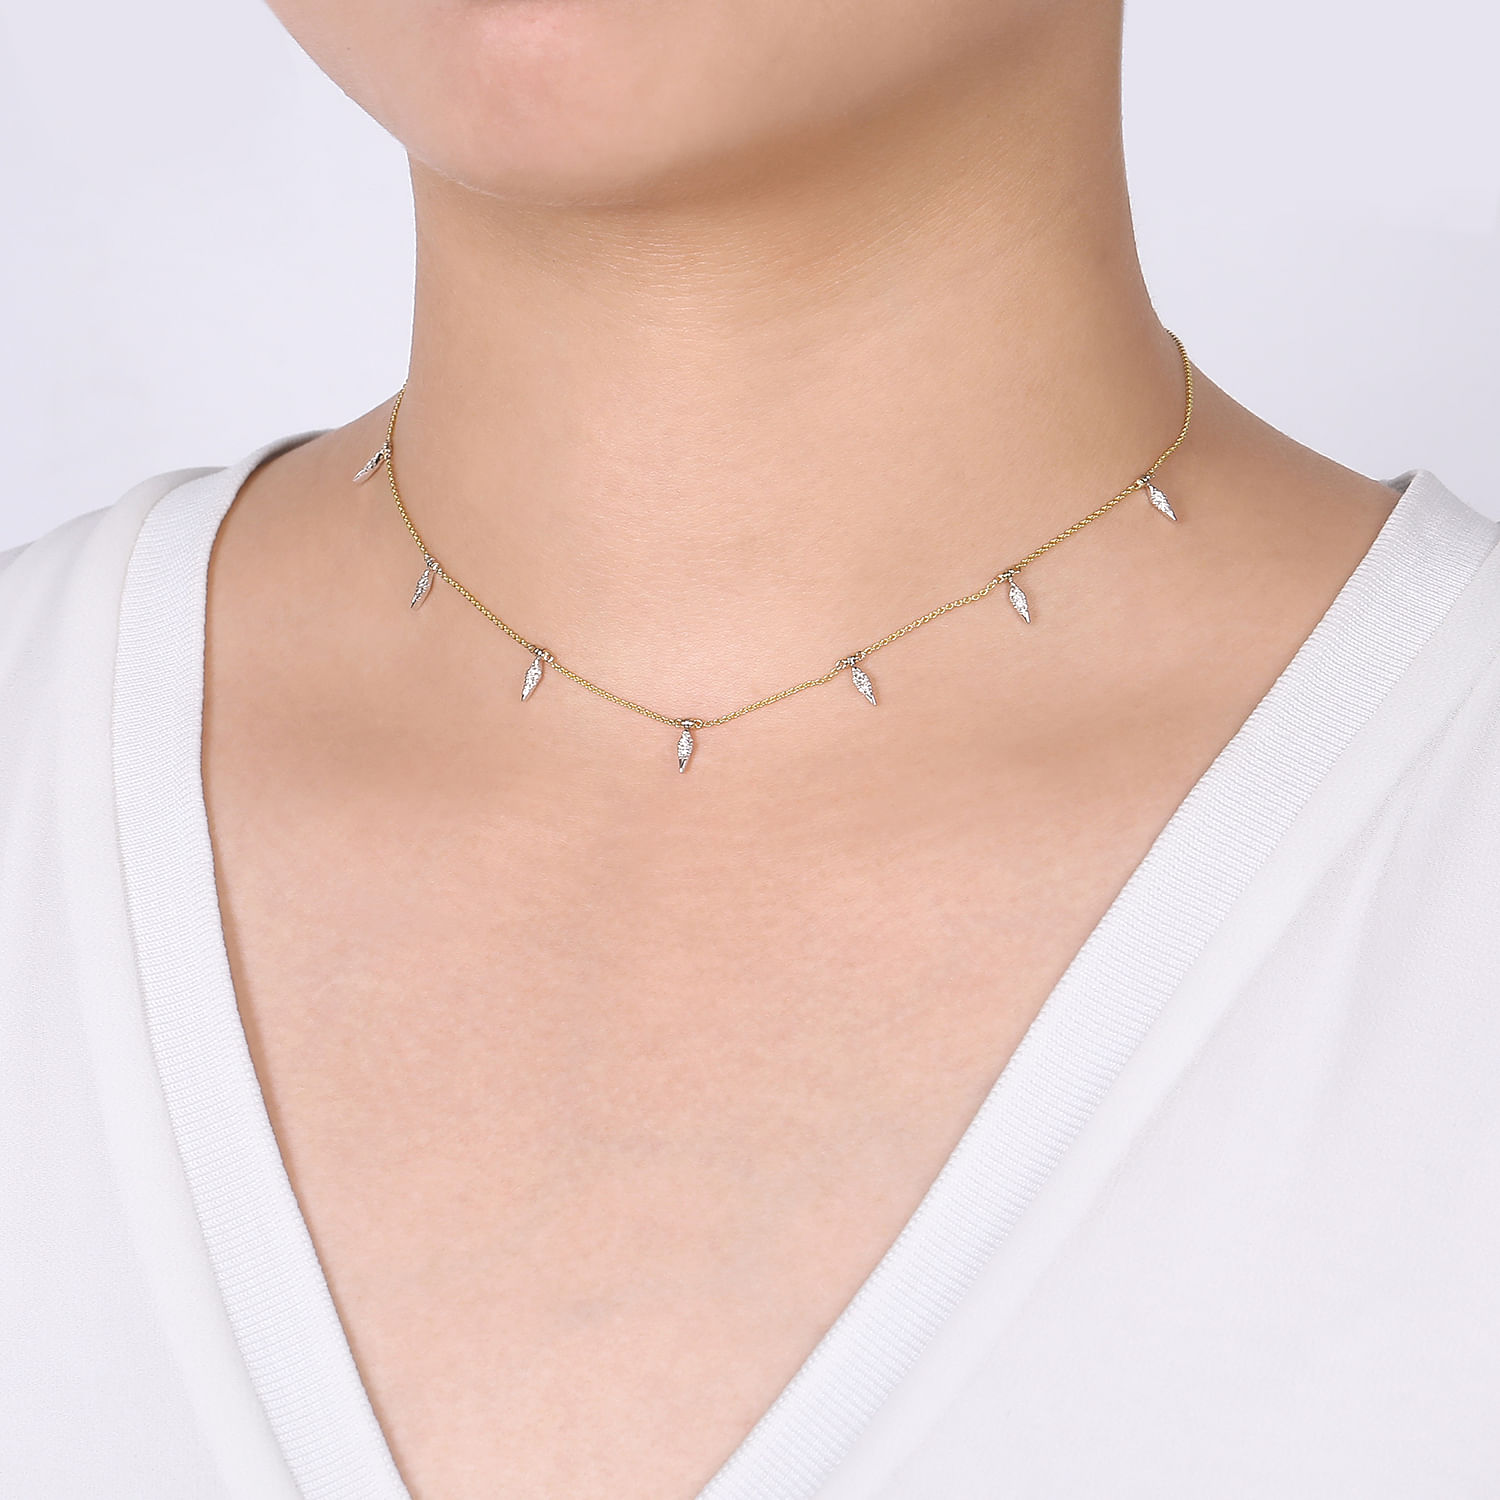 14K Yellow-White Gold Chain Necklace with Diamond Pavé Kite Drops